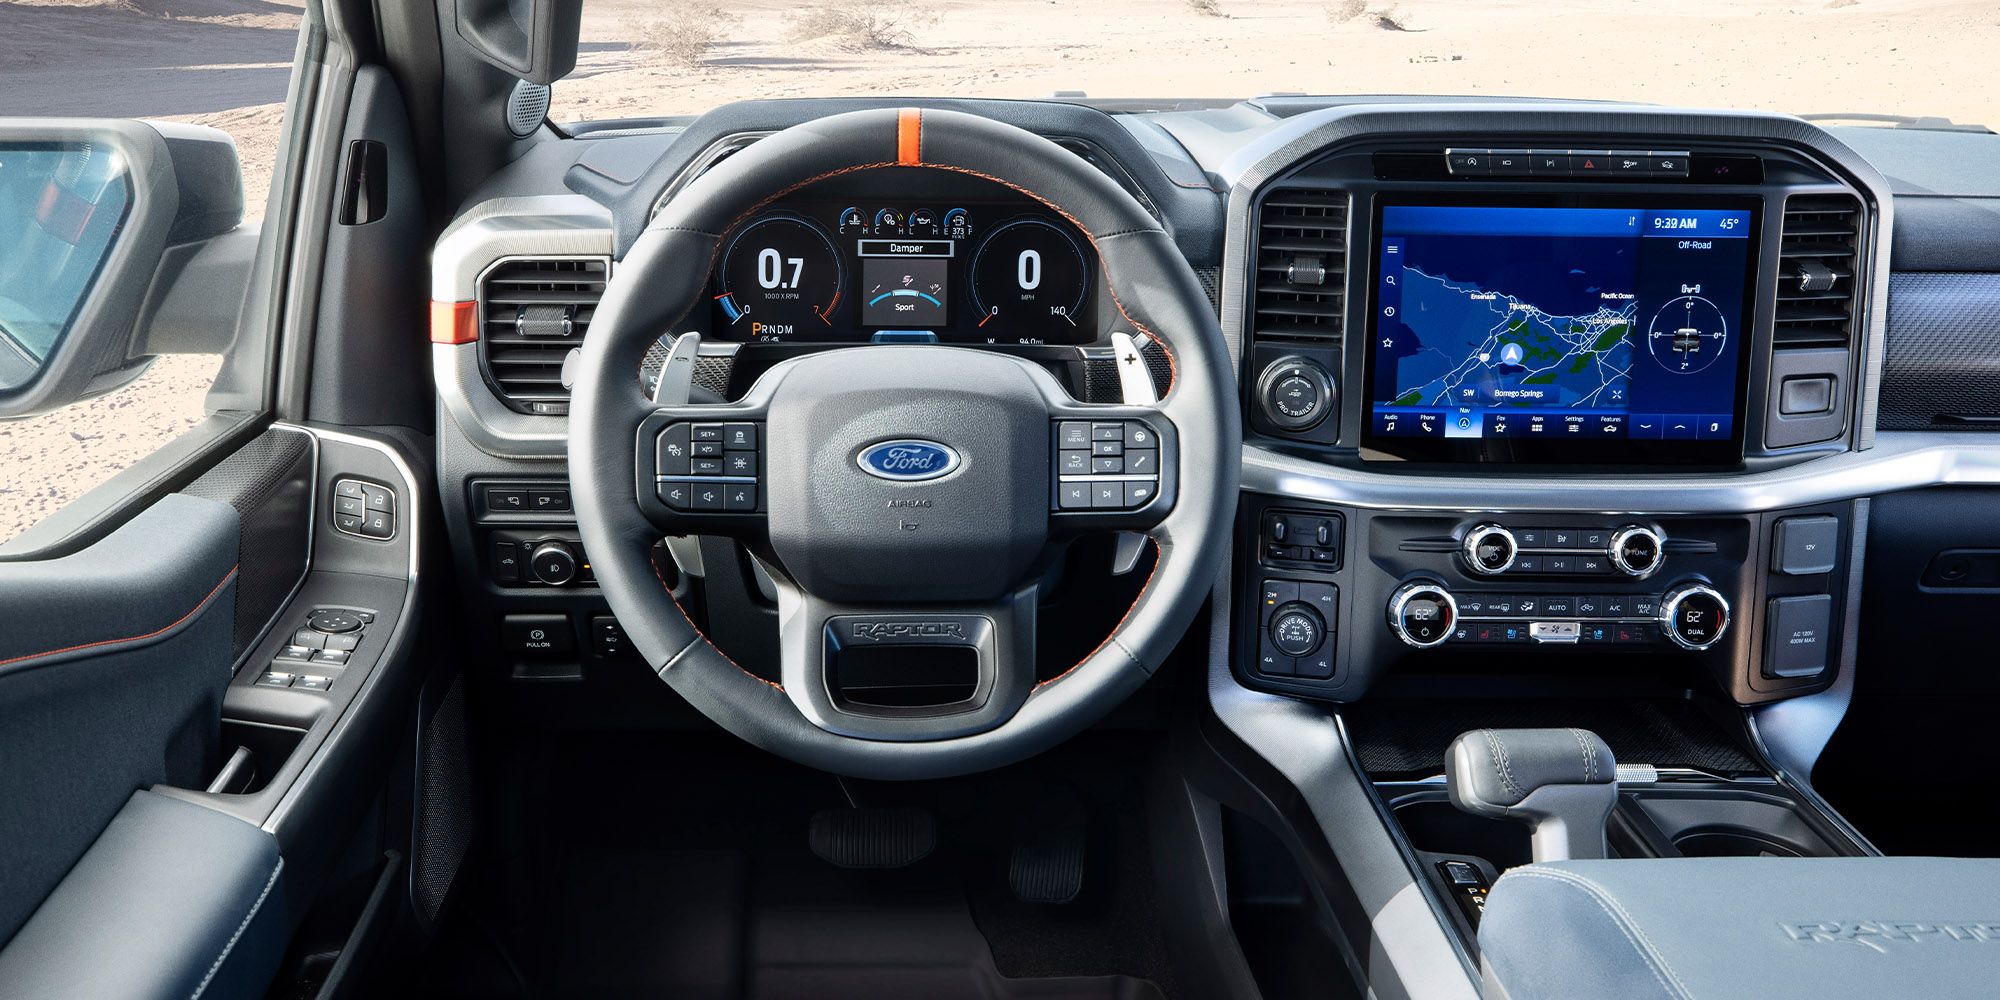 The interior of the F150 Raptor